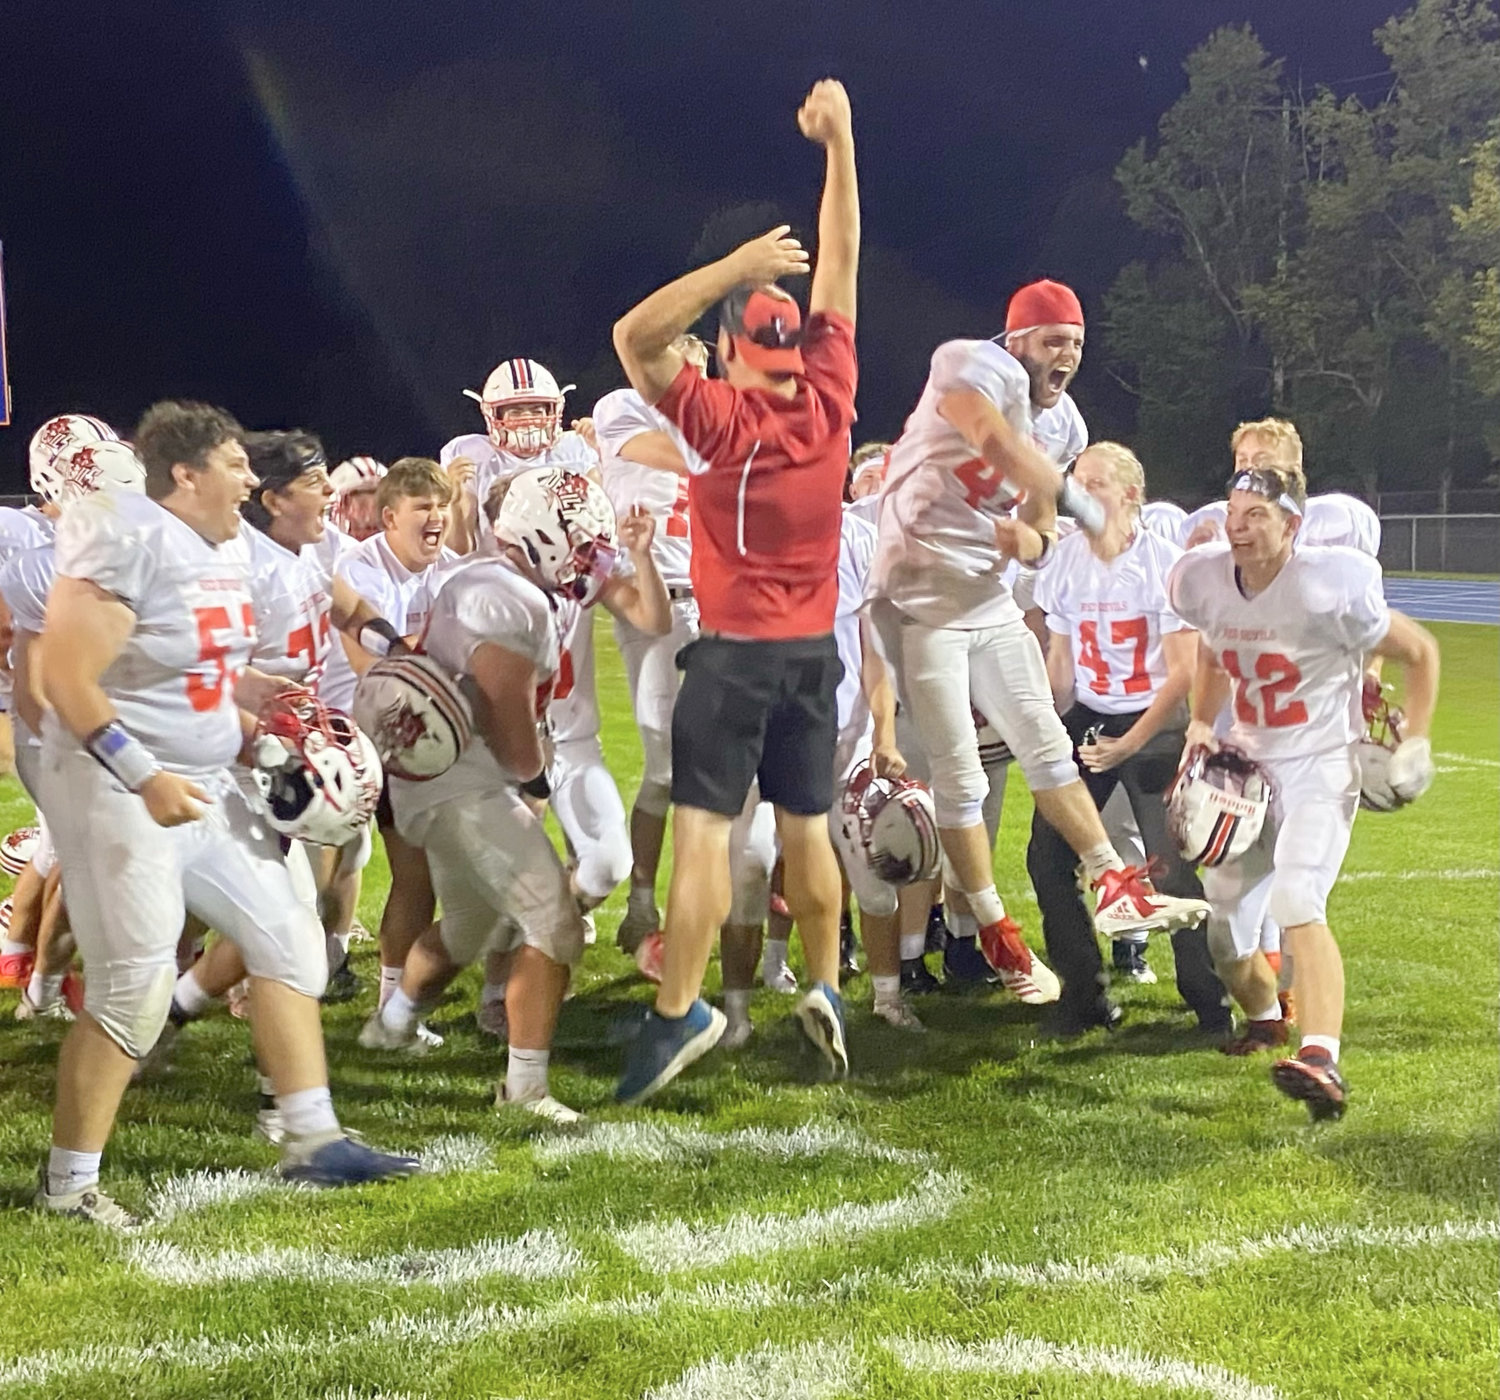 The Vernon-Vernona-Sherrill football team celebrates after a 14-0 victory over host Oneida on Friday. It was the 72nd meeting between the rivals.